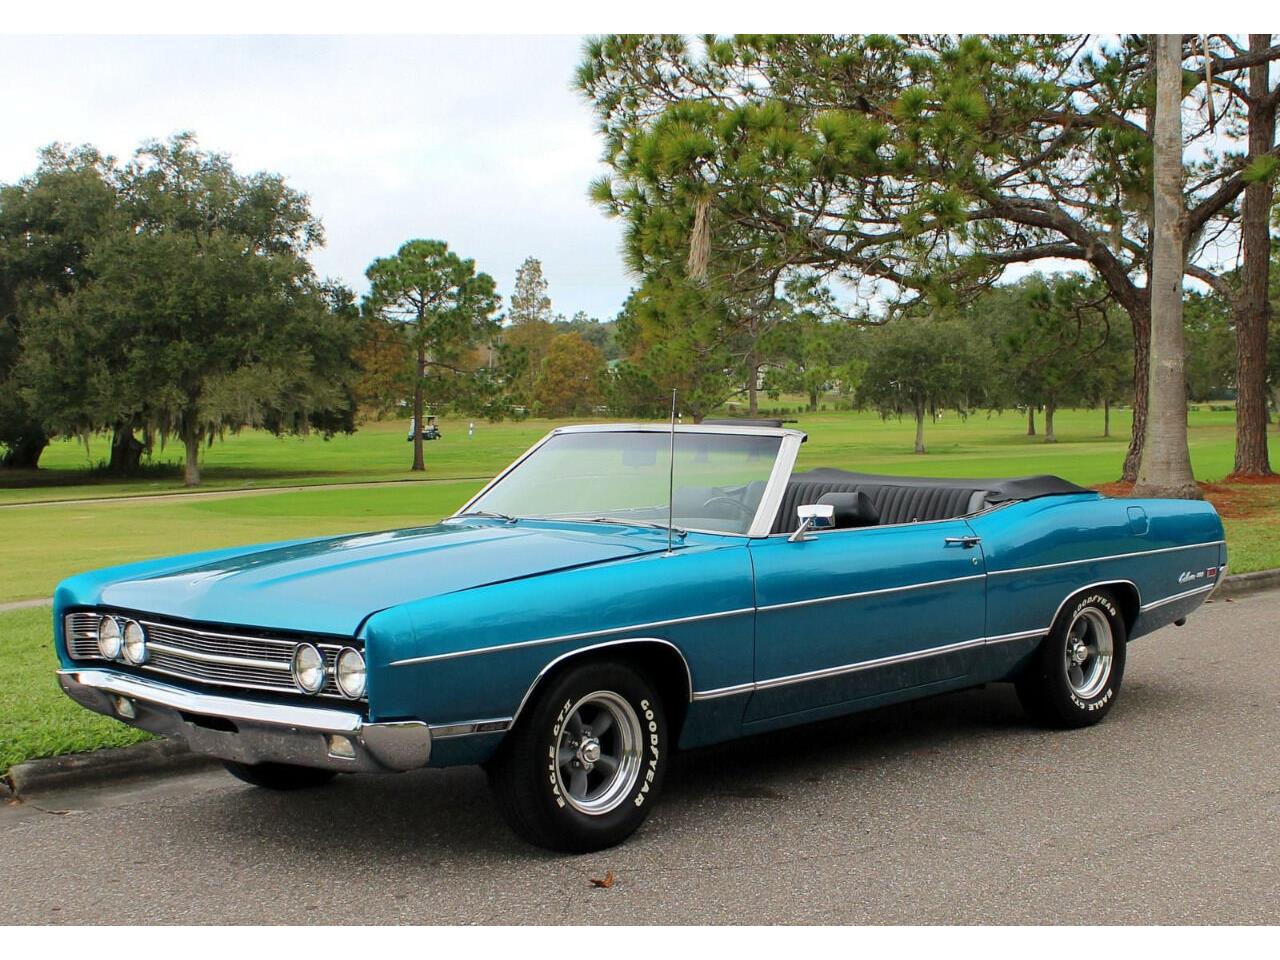 For Sale: 1969 Ford Galaxie in Clearwater, Florida.